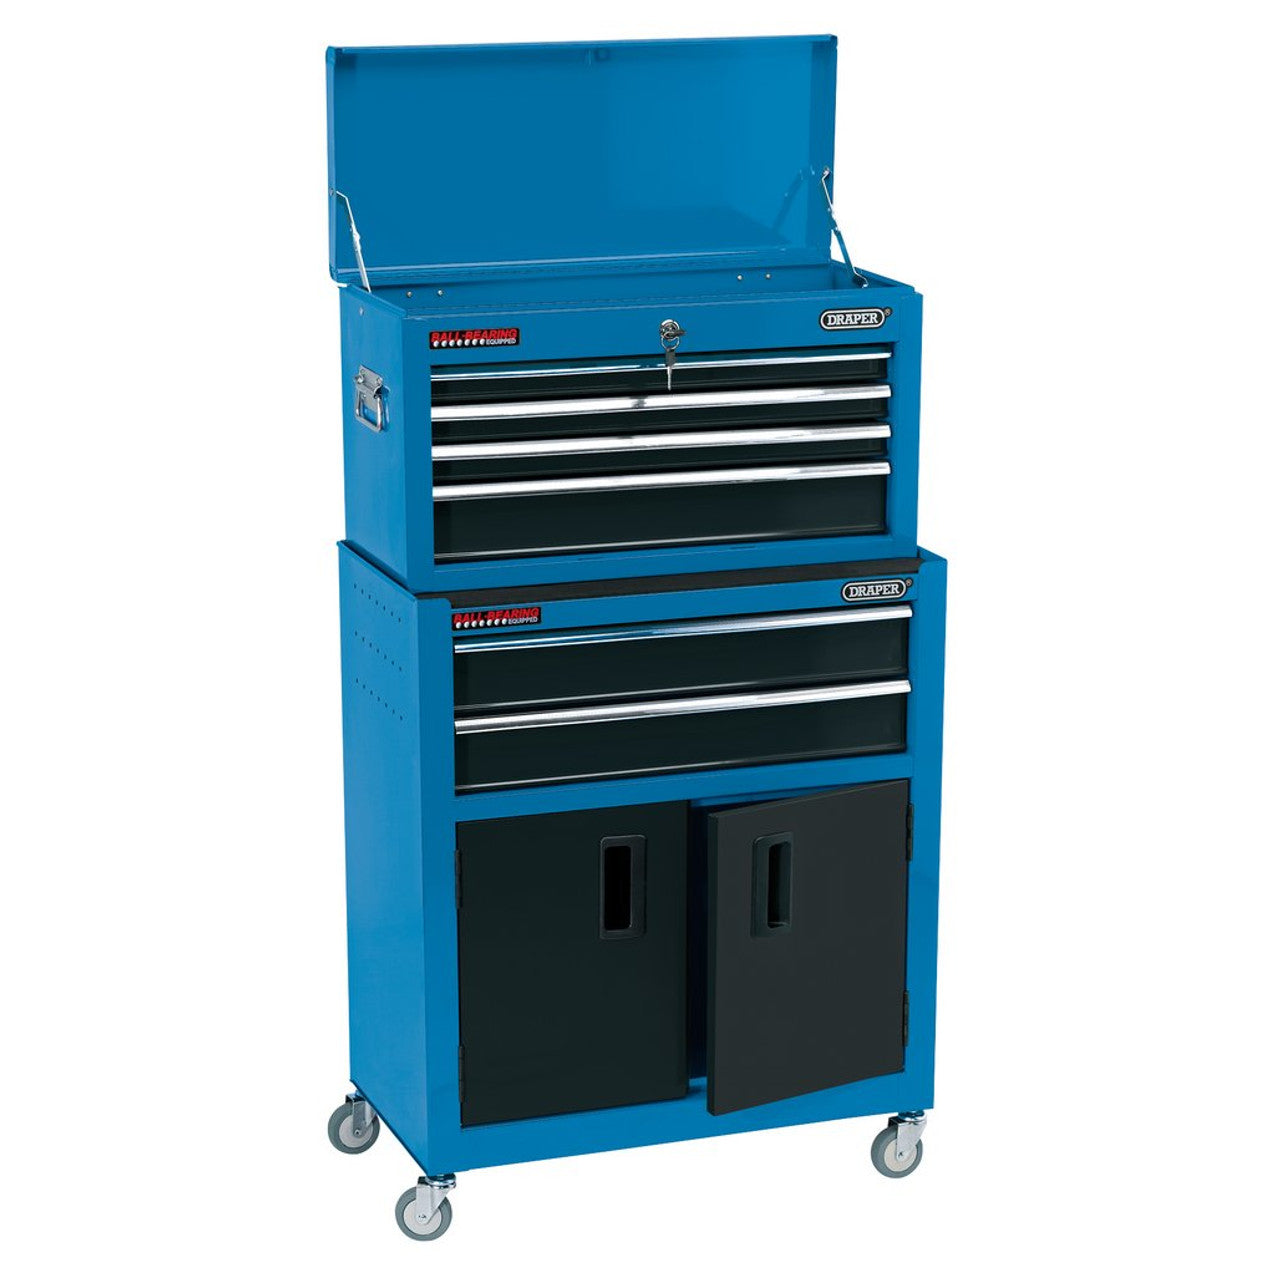 Draper 19563 Combined Roller Cabinet and Tool Chest, 6 Drawer, 24", Blue